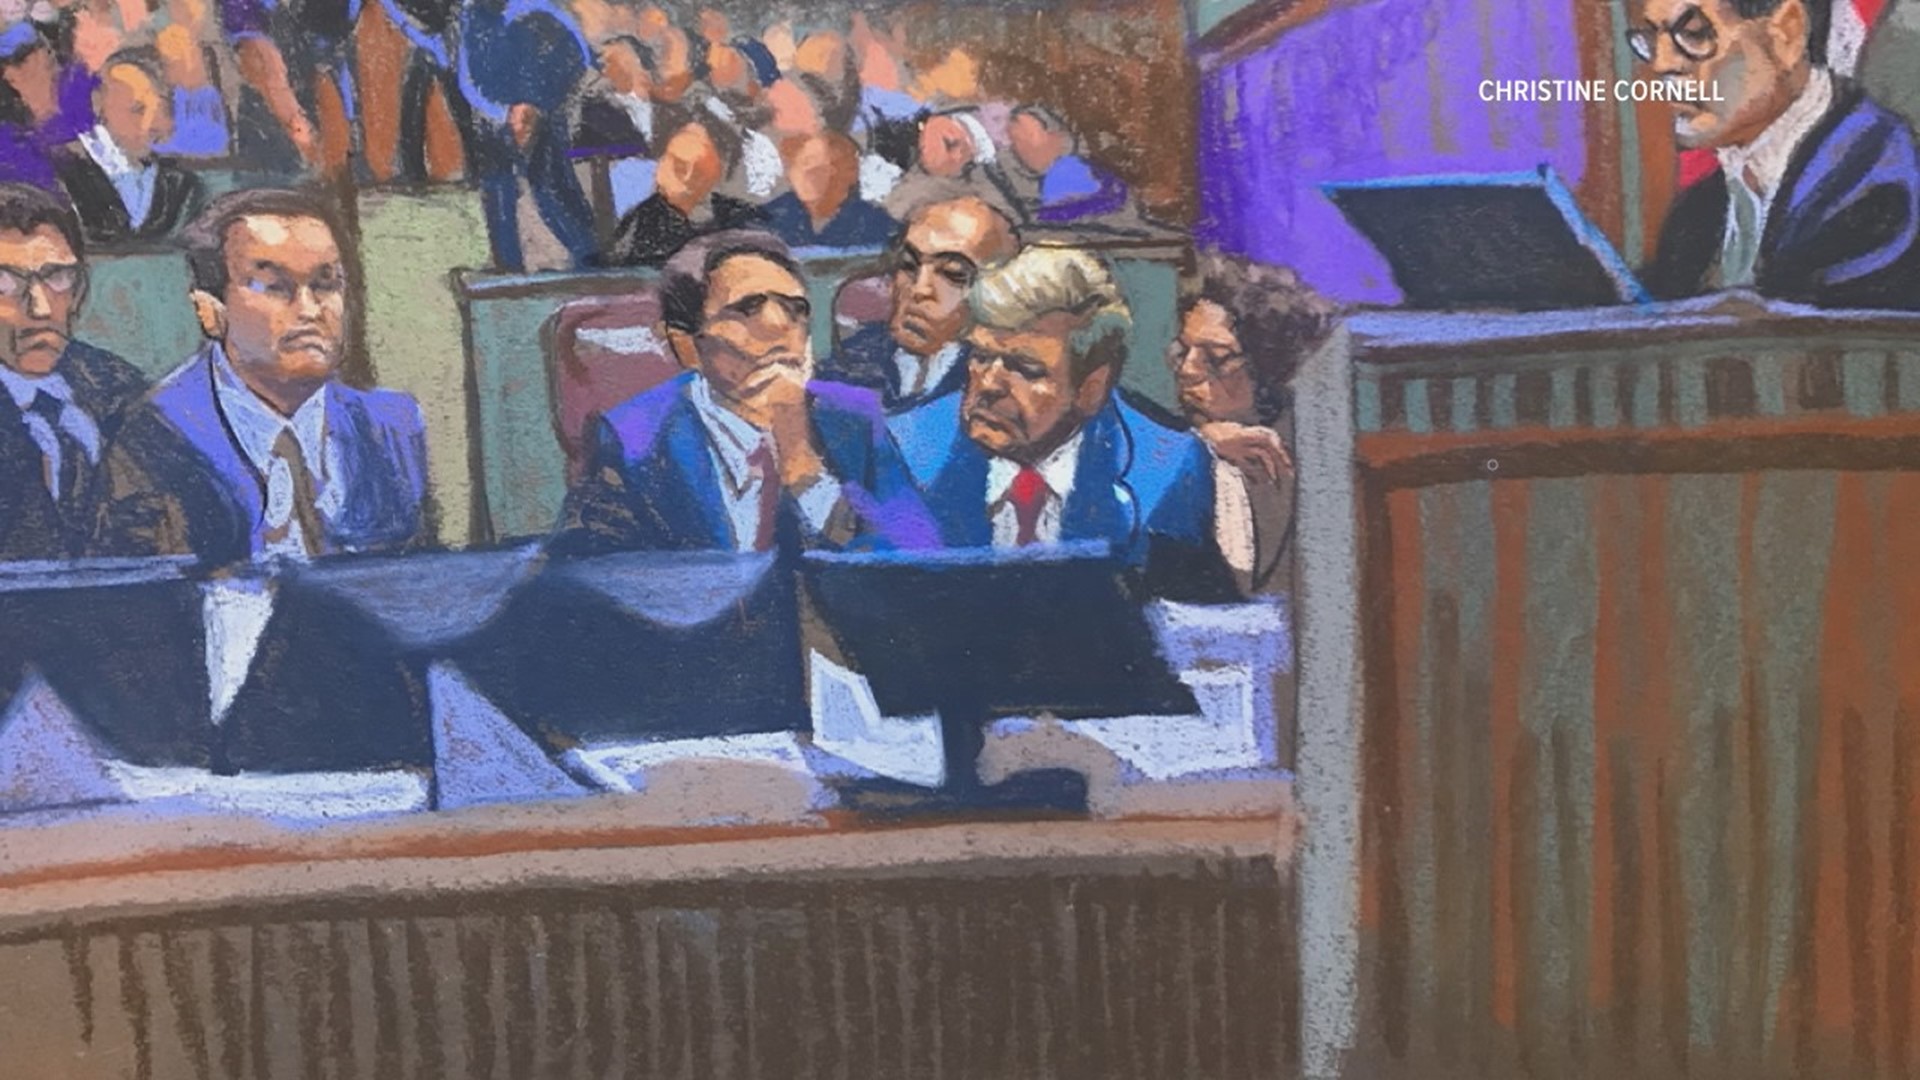 Eleven more jurors need to be seated before the first criminal trial of a former president.